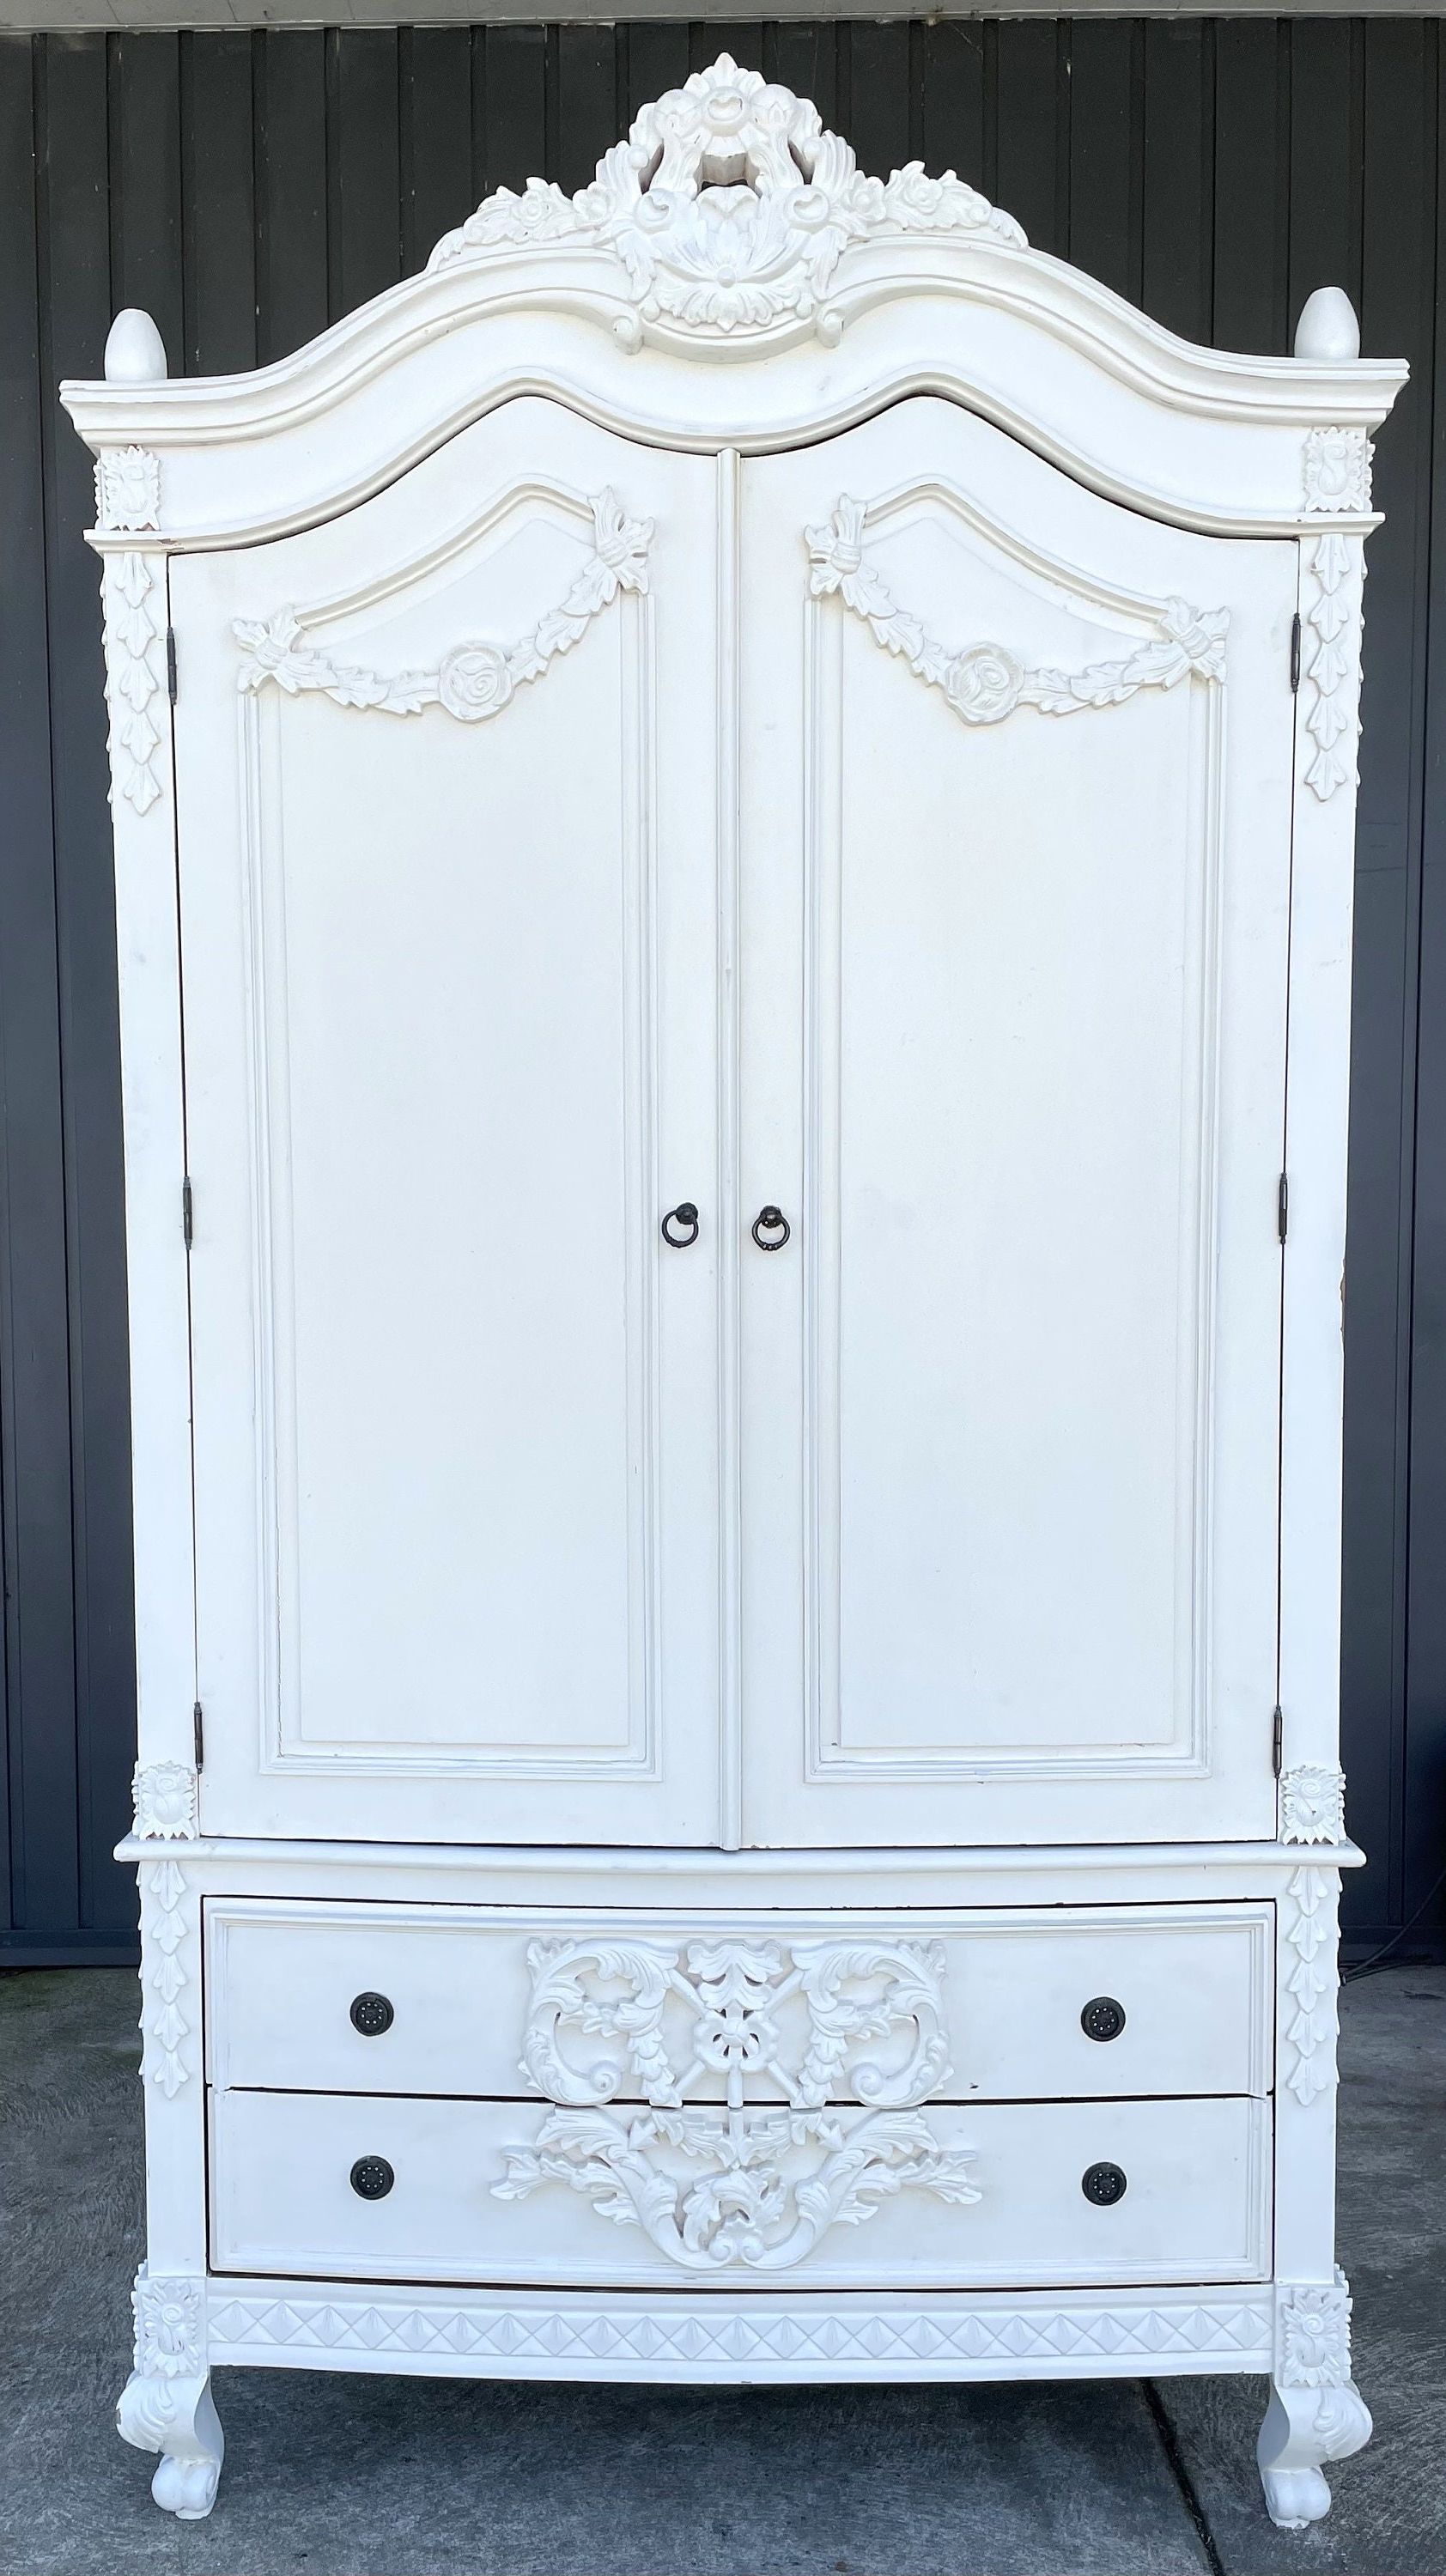 Shabby Chic Distressed White Vintage Style French Baroque – Etsy In White Shabby Chic Wardrobes (Gallery 2 of 20)